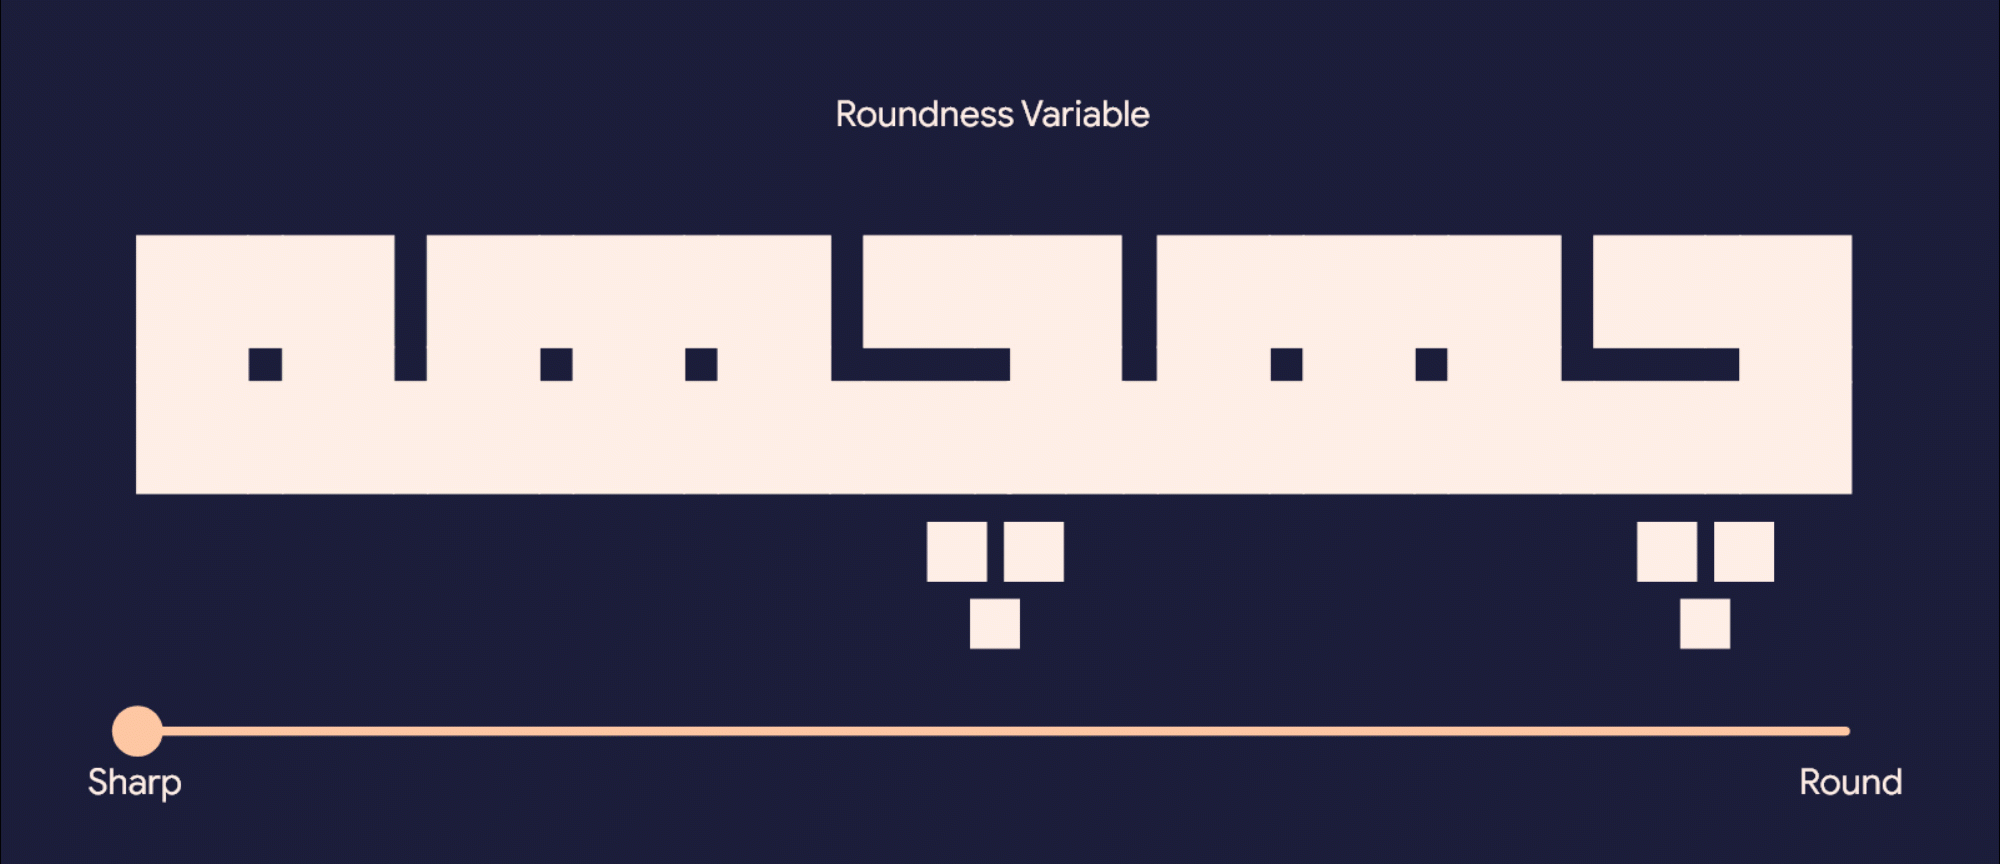 06 Roundness Variable (JUST PRO)